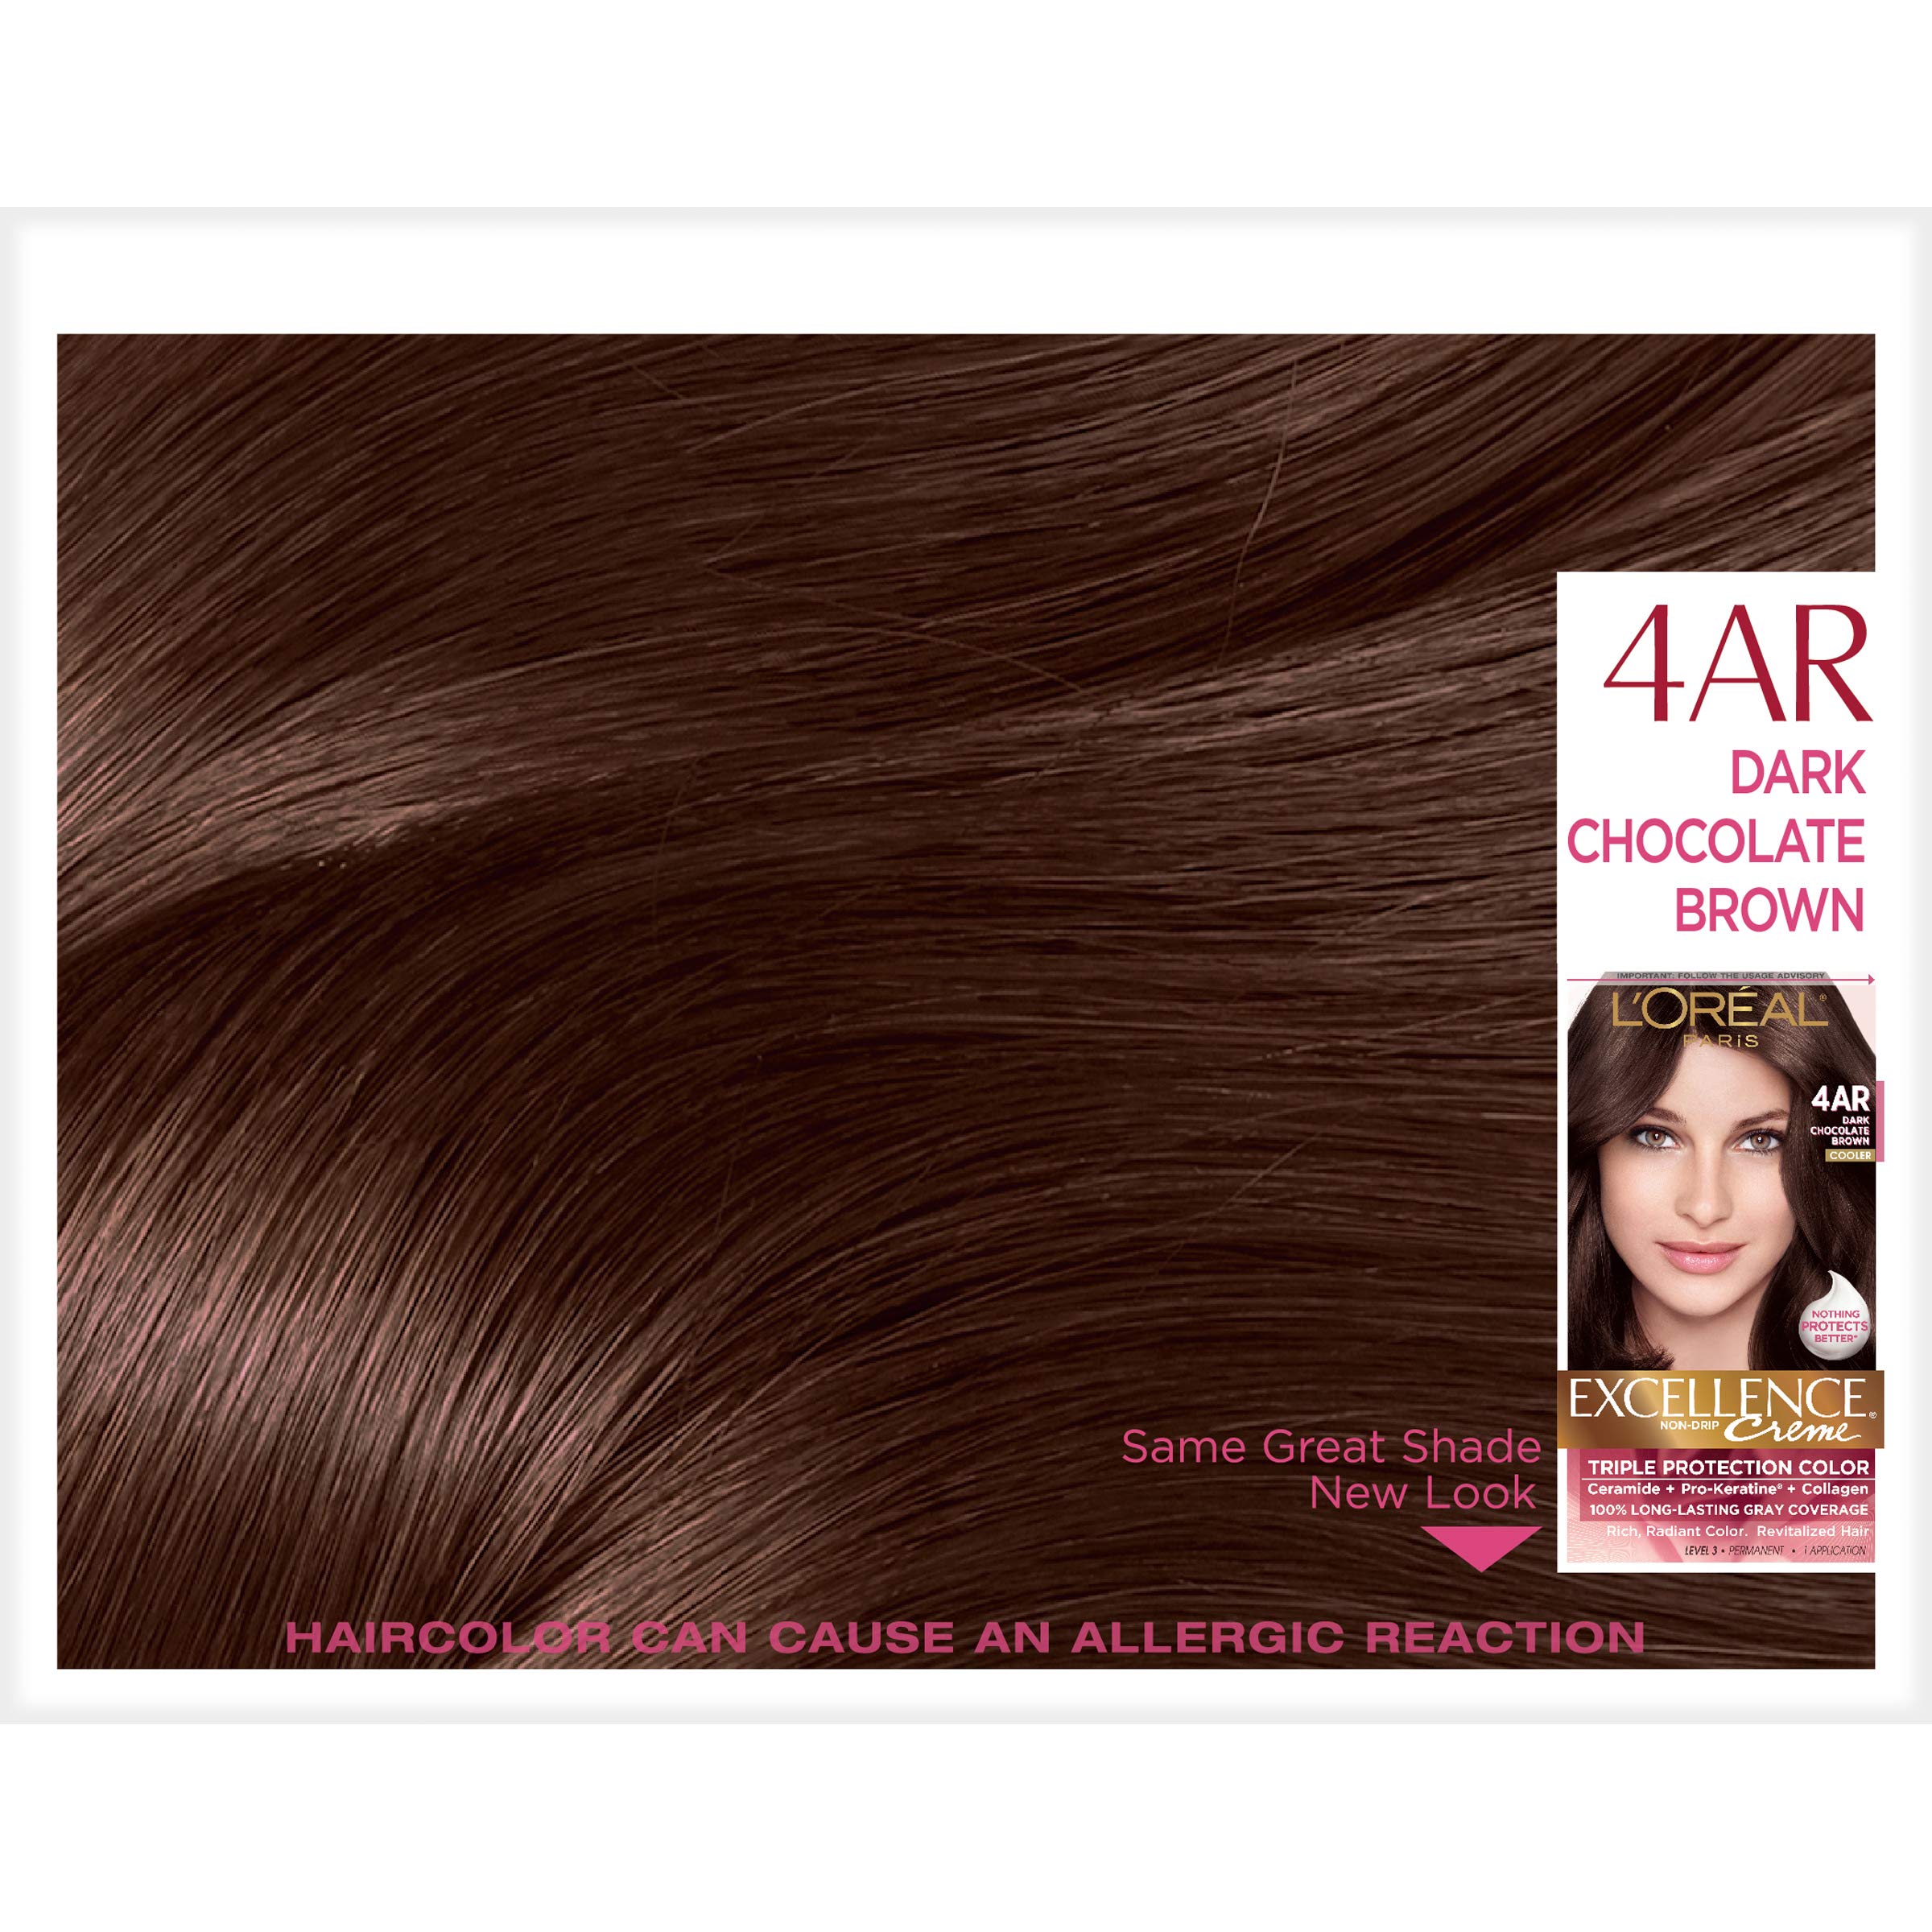 L'Oreal Paris Excellence Creme Permanent Hair Color, 4AR Dark Chocolate Brown (Pack of 3)